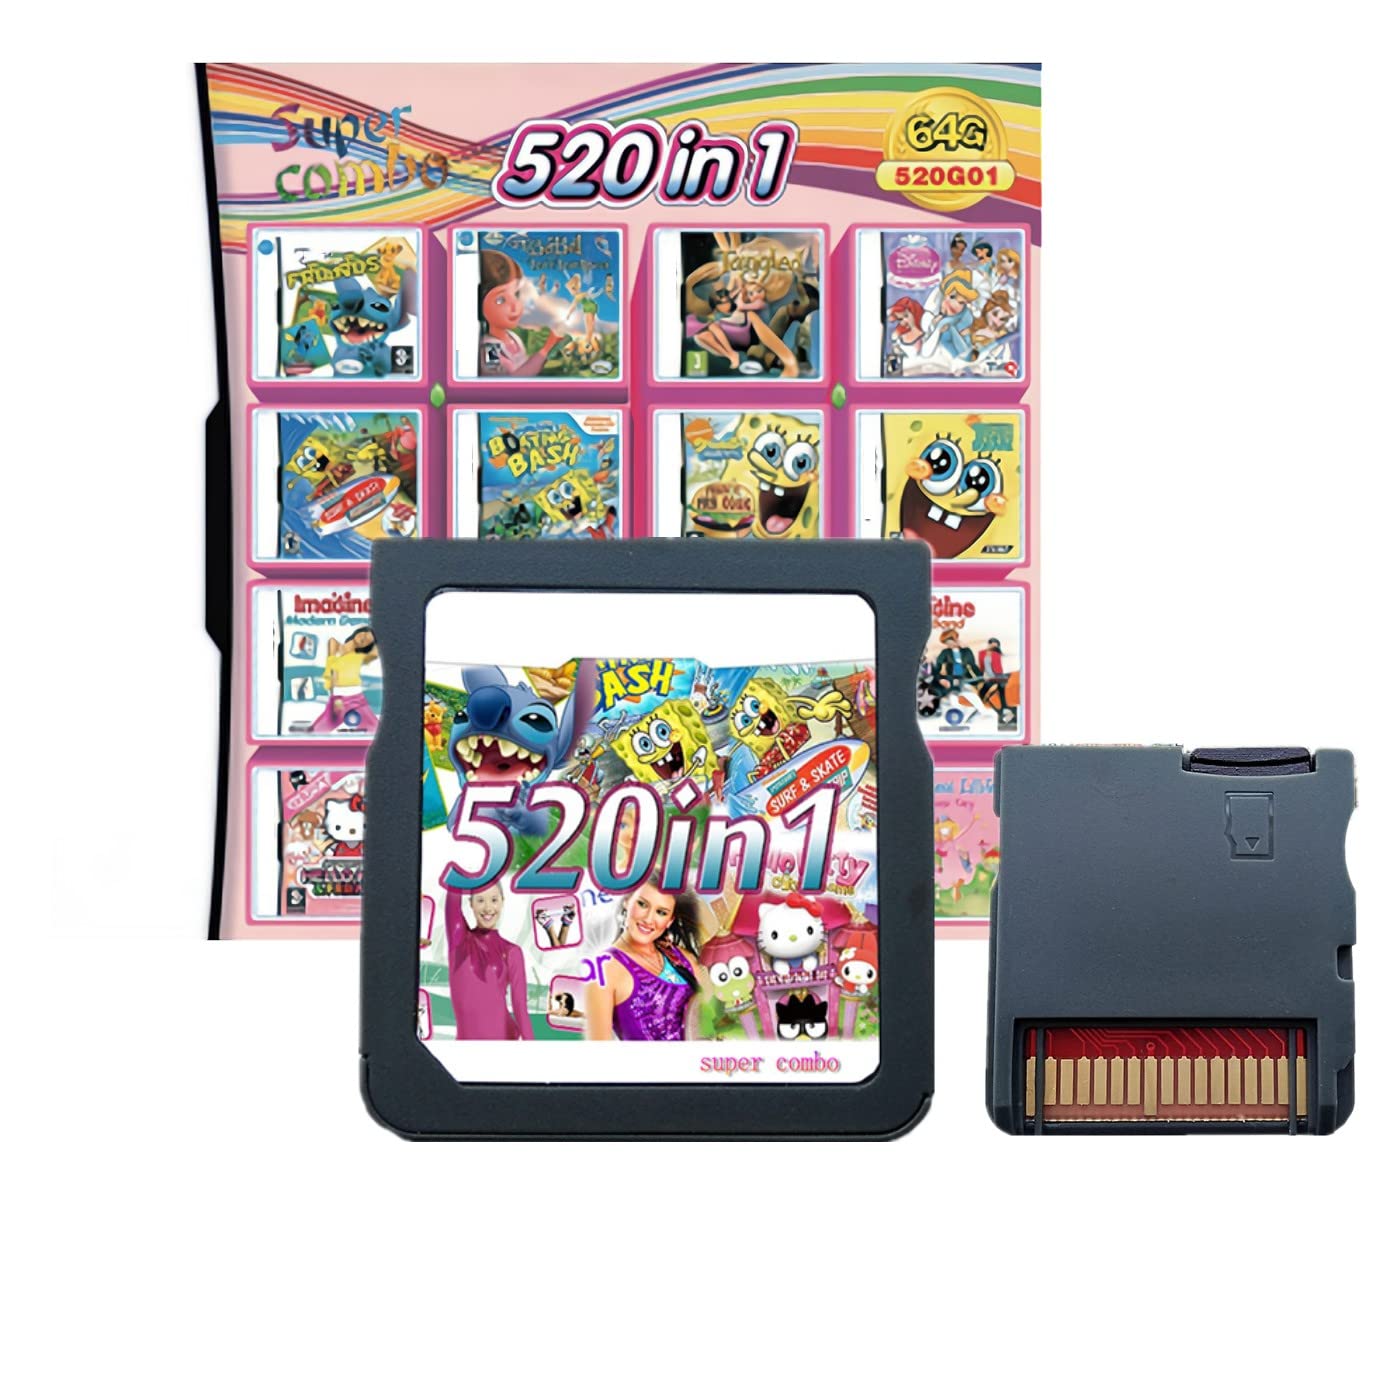 520 in 1 Super Combination Game Card，520 in 1 Game Cartridge，Contains 520 Classic Retro Games